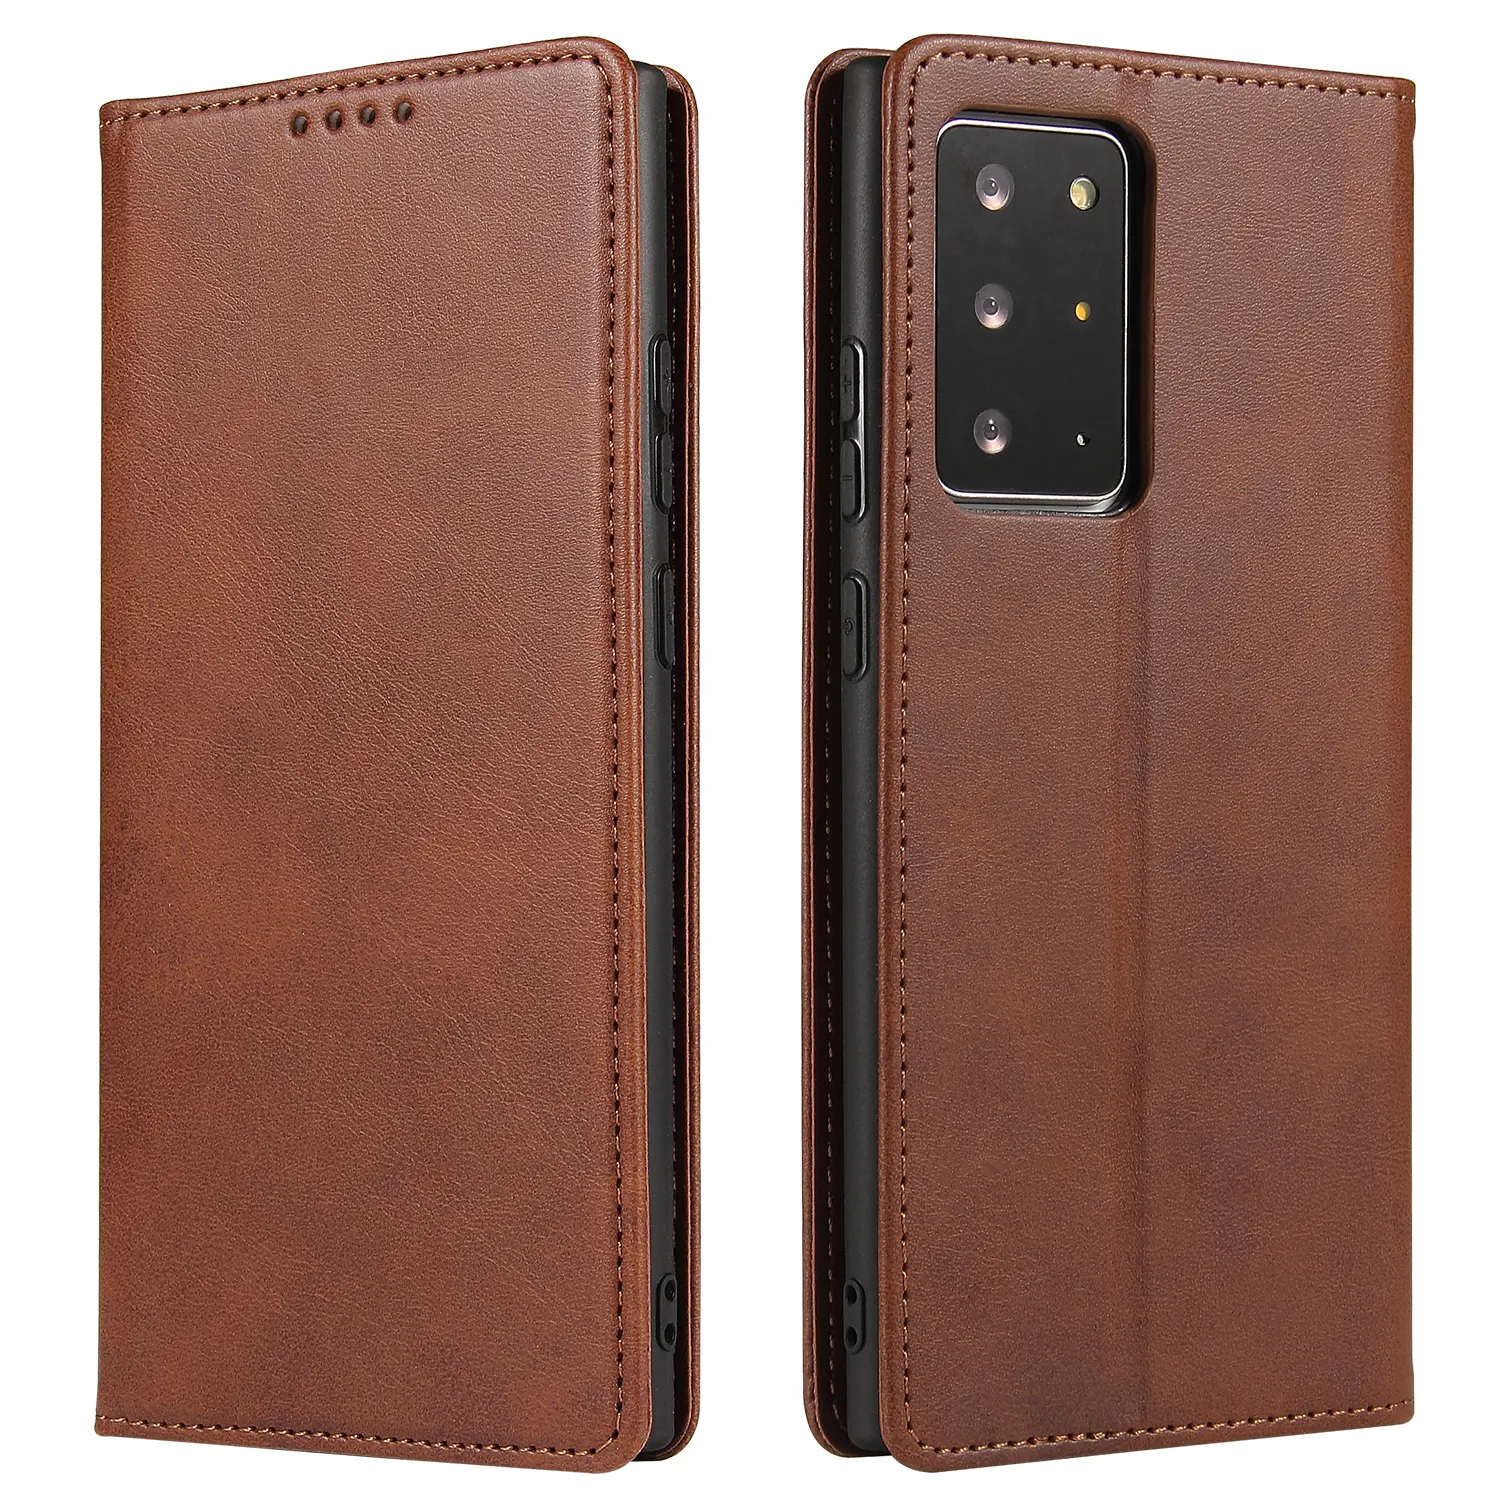 Luxury Wallet Card Holder Flip Leather Book Cover for S22 Ultra Note 20 Plus Ultra 5G Wallet Cases for Samsung Galaxy